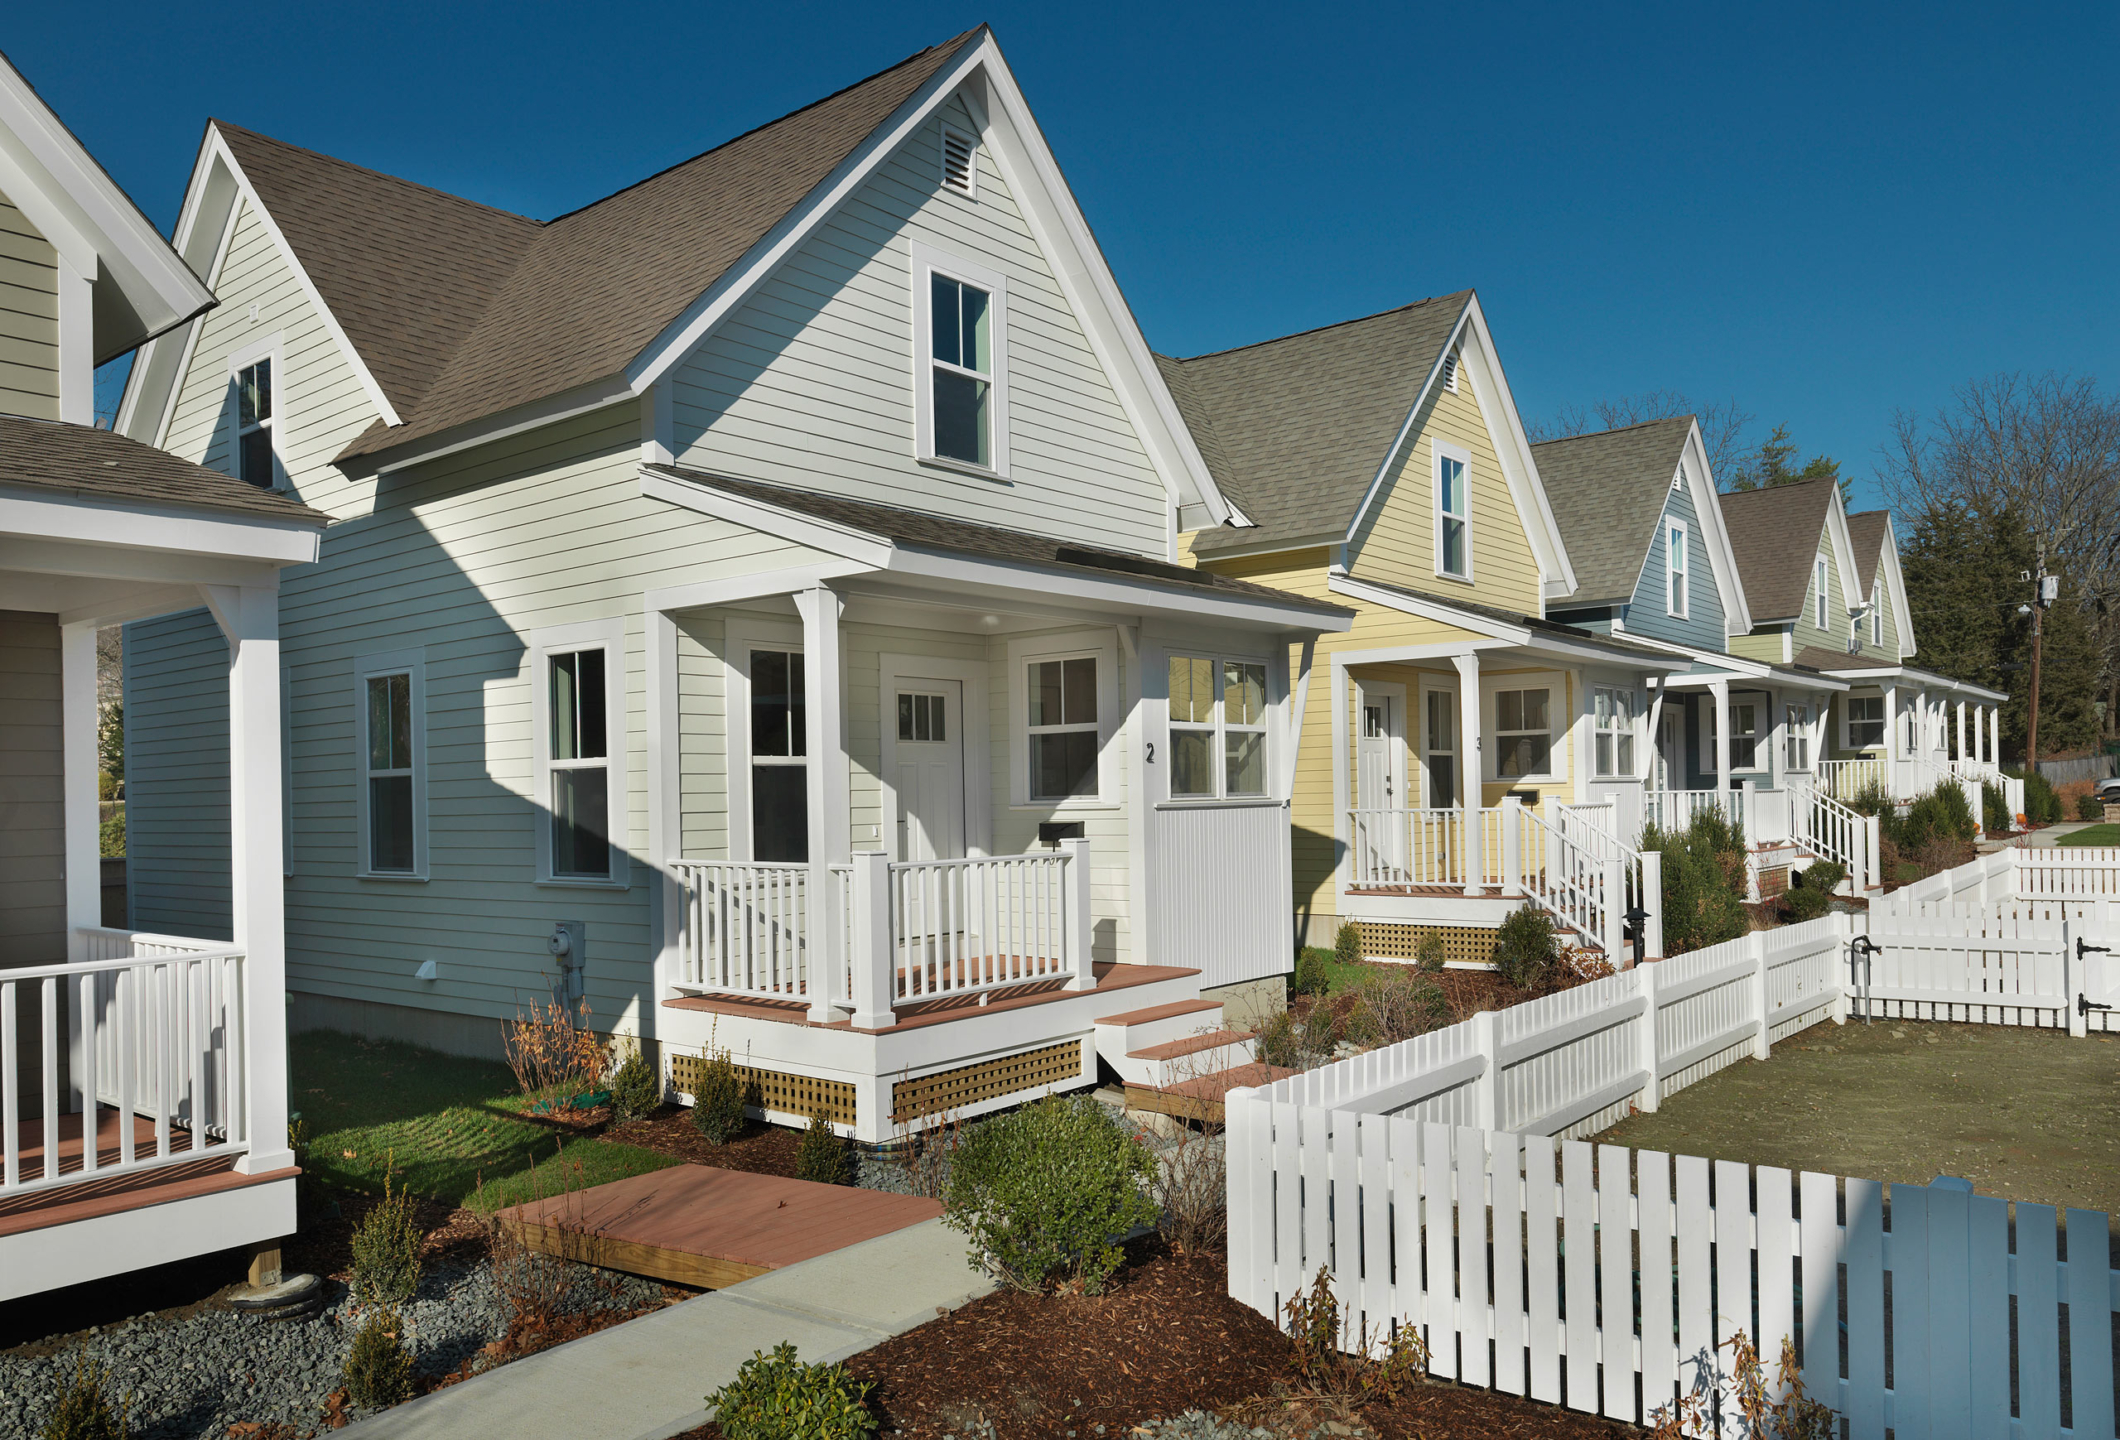 The mix of cottage types and bioswale landscaping add character to this community.